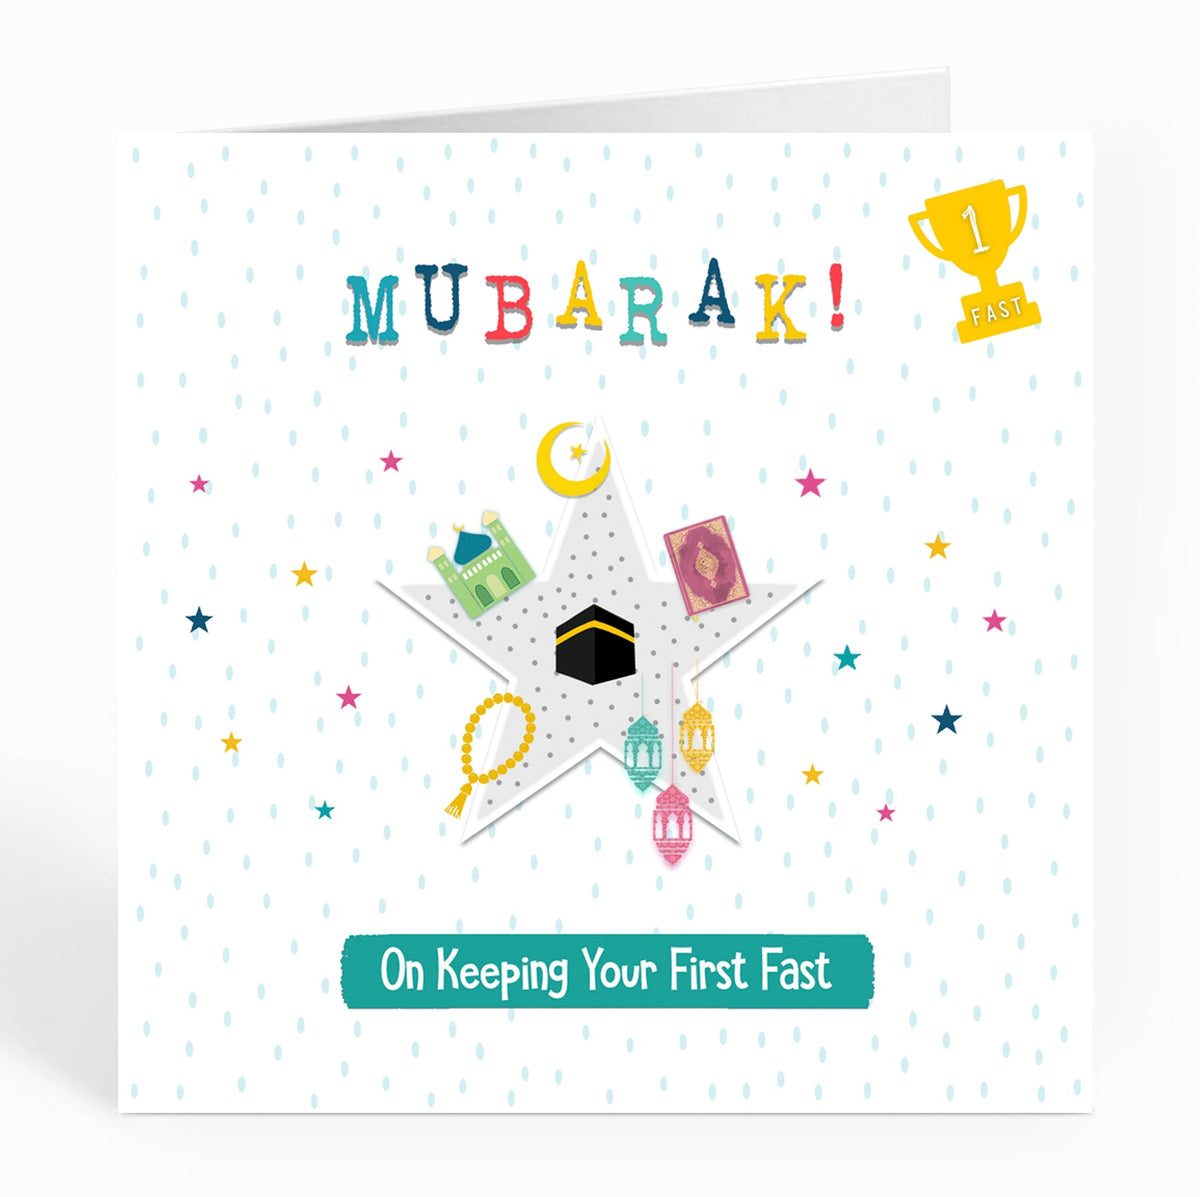 Mubarak! On Keeping Your First Fast